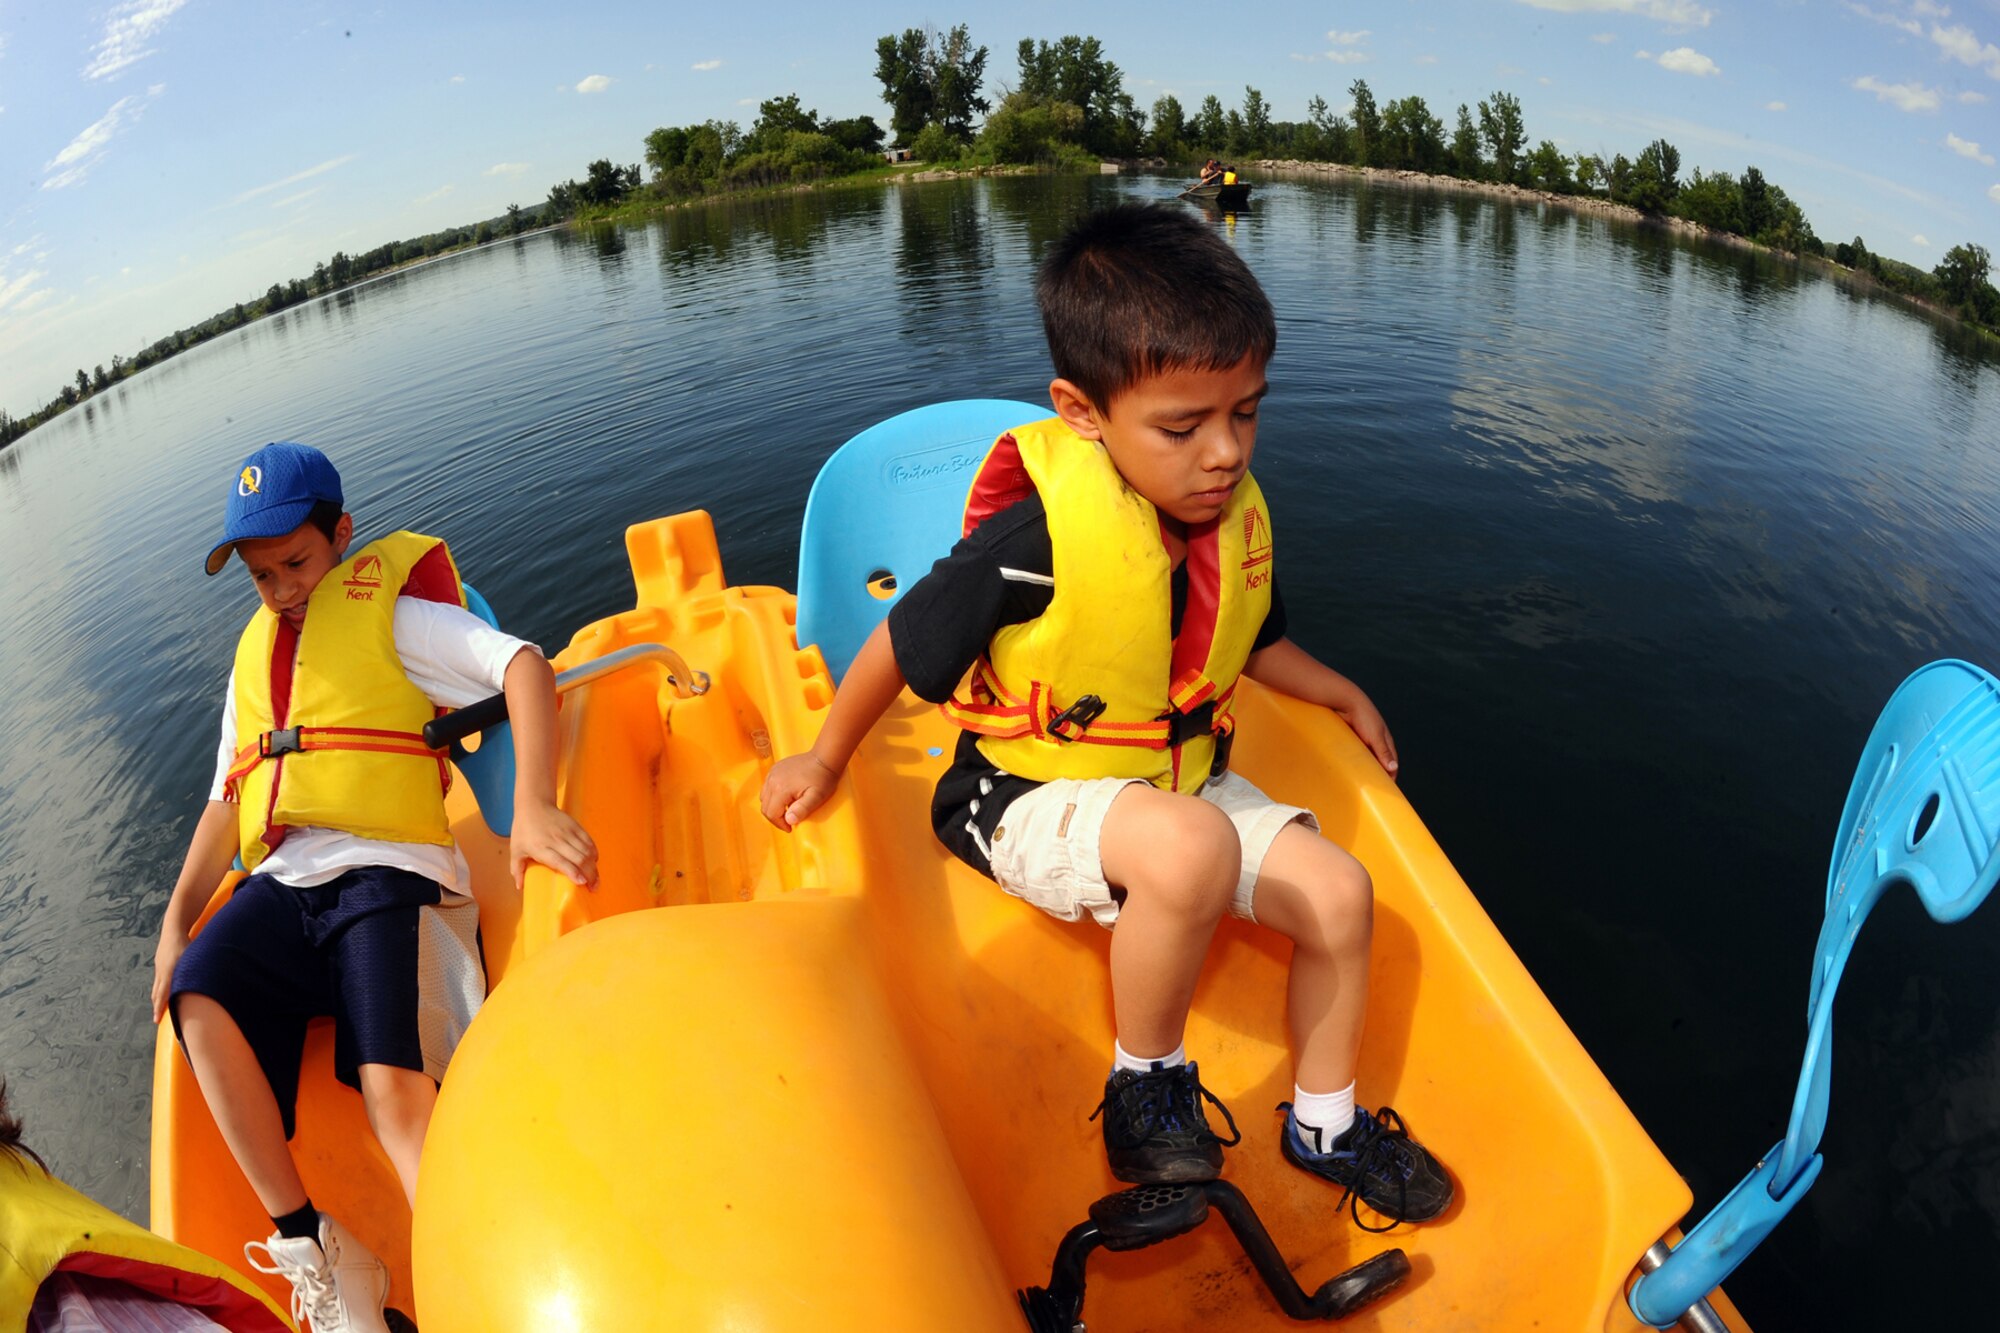 OFFUTT AIR FORCE BASE Neb. -- Benaiah (left) and Joel Fern(right), sons of retired Major James Fern U.S. Strategic Command, skim across the base lake in a peddle boat during the Independence Day celebration at the base lake July 2. The annual celebration, included games, refreshments and a fireworks display at dusk.

U.S. Air Force Photo by Josh Plueger